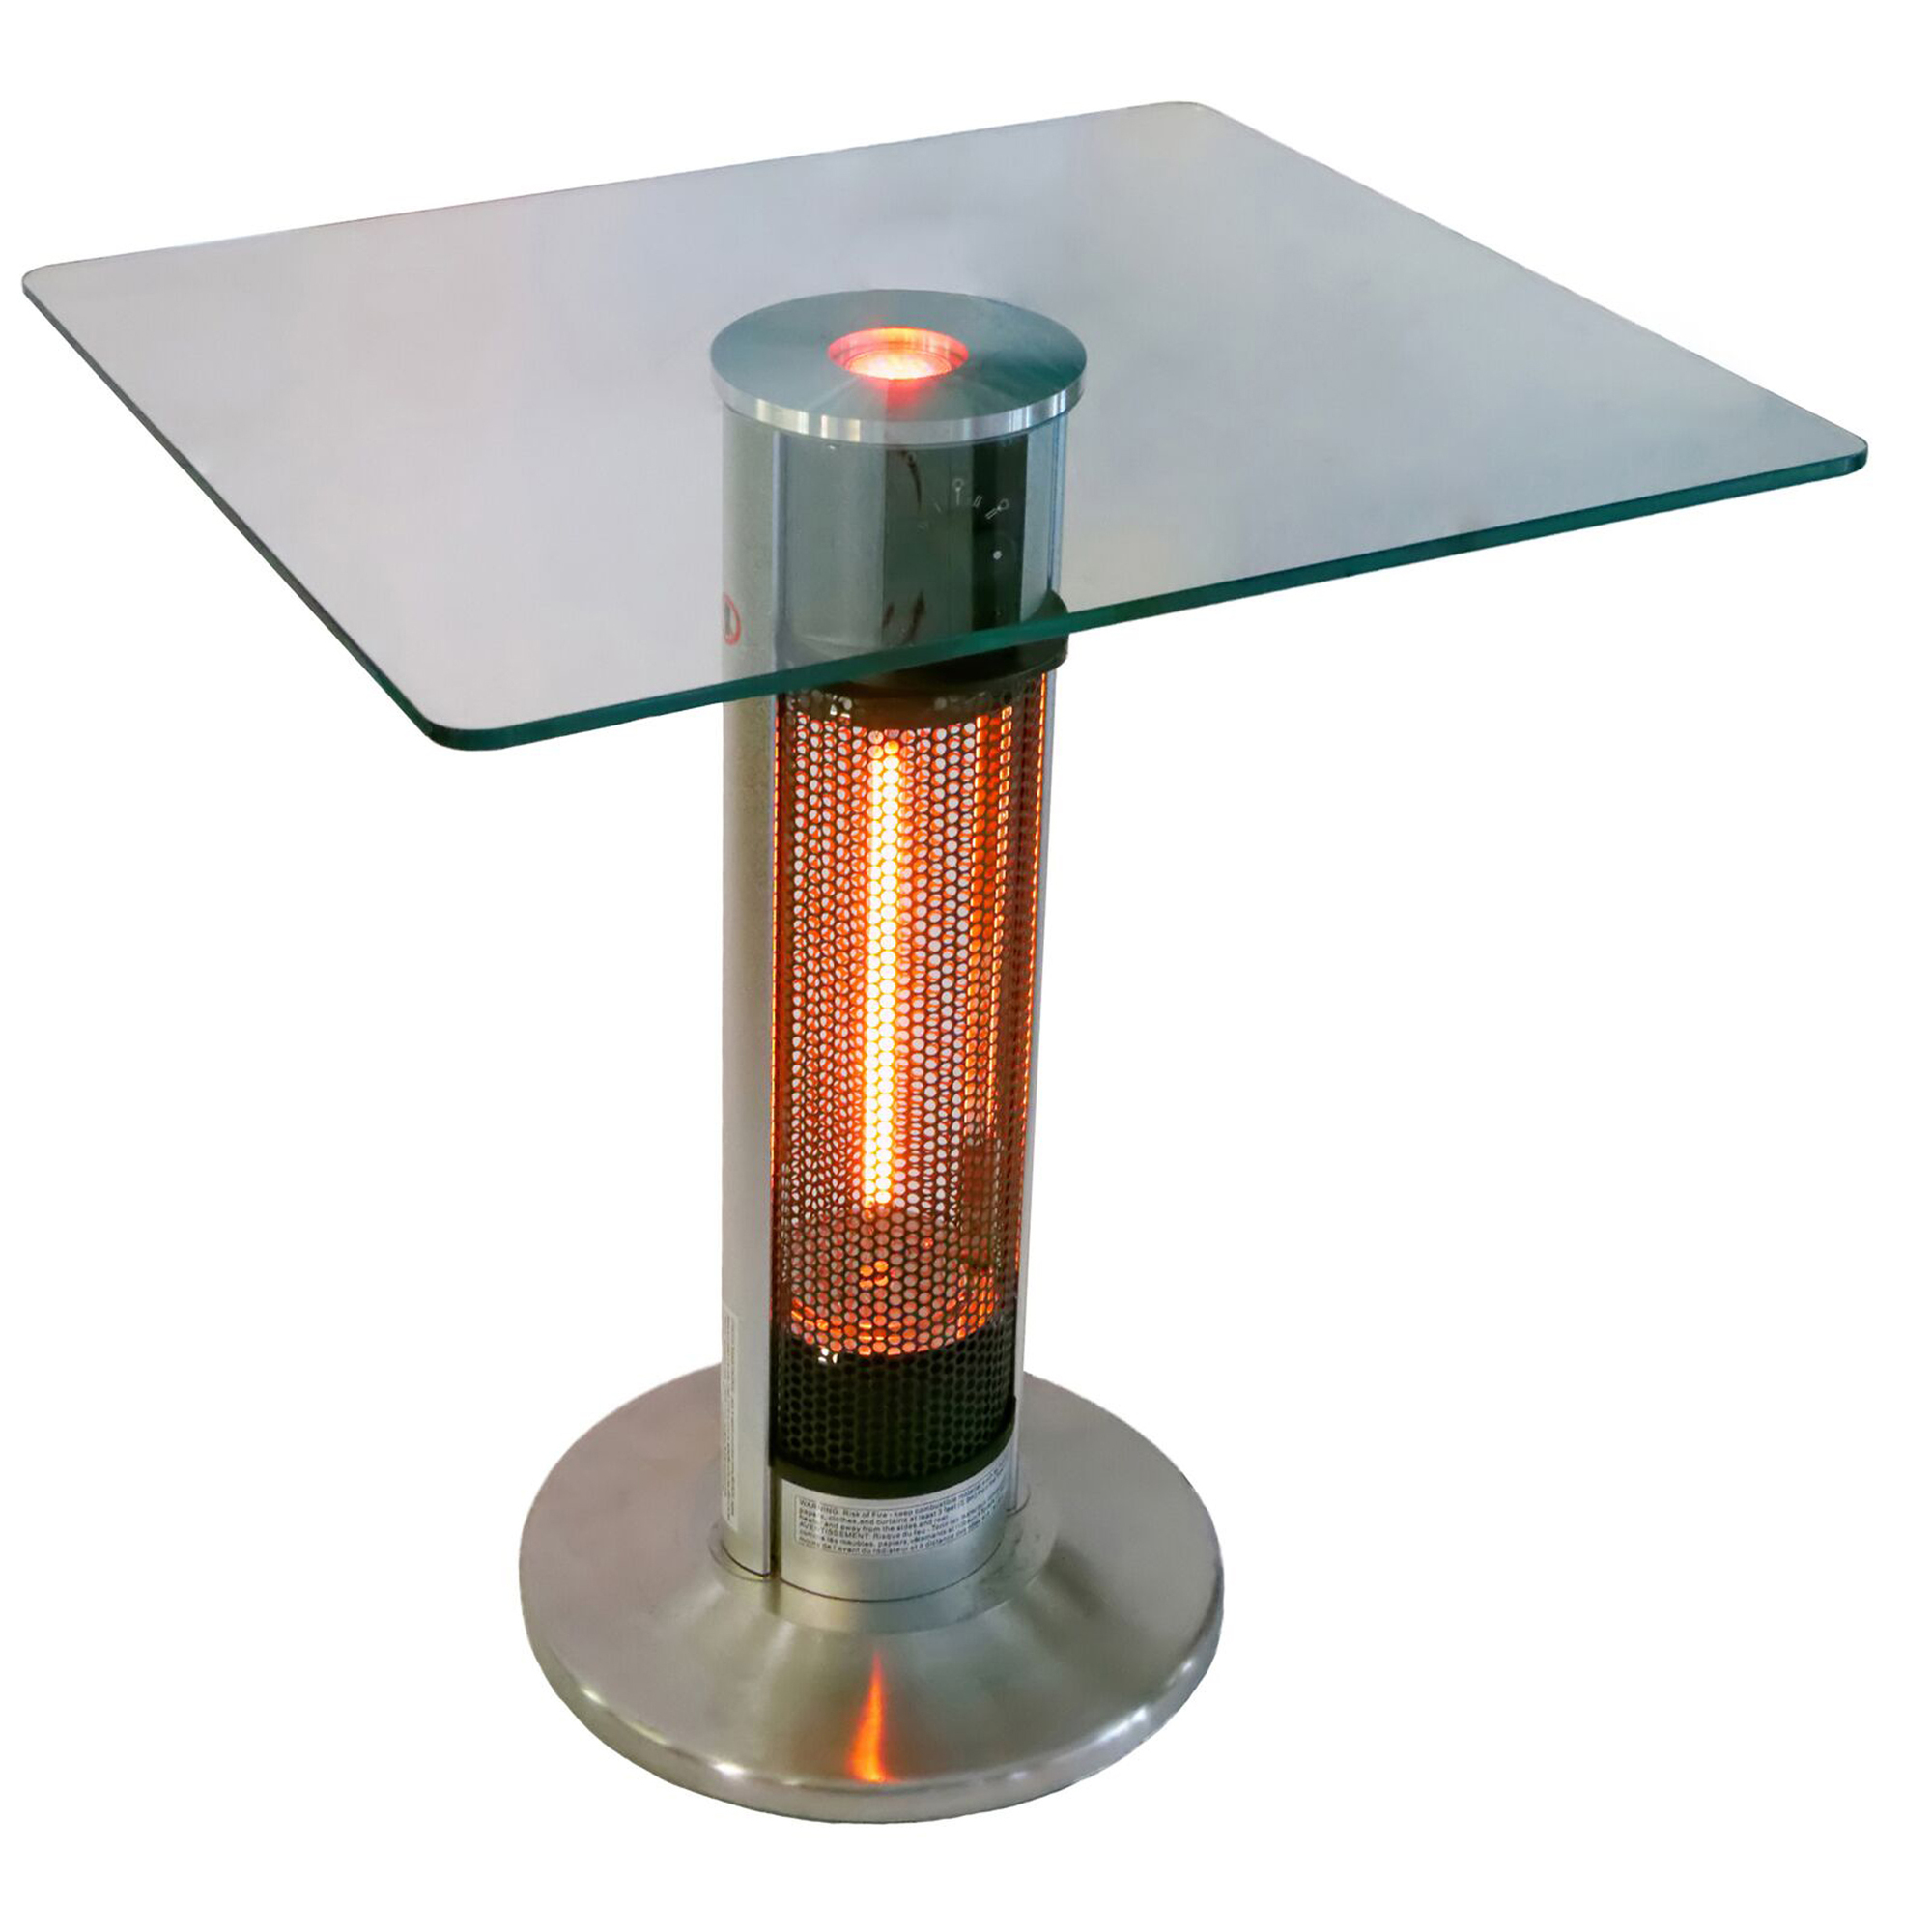 ENERG, Bistro table with patio heat and square glass top, Model HEA-1575J67L-2